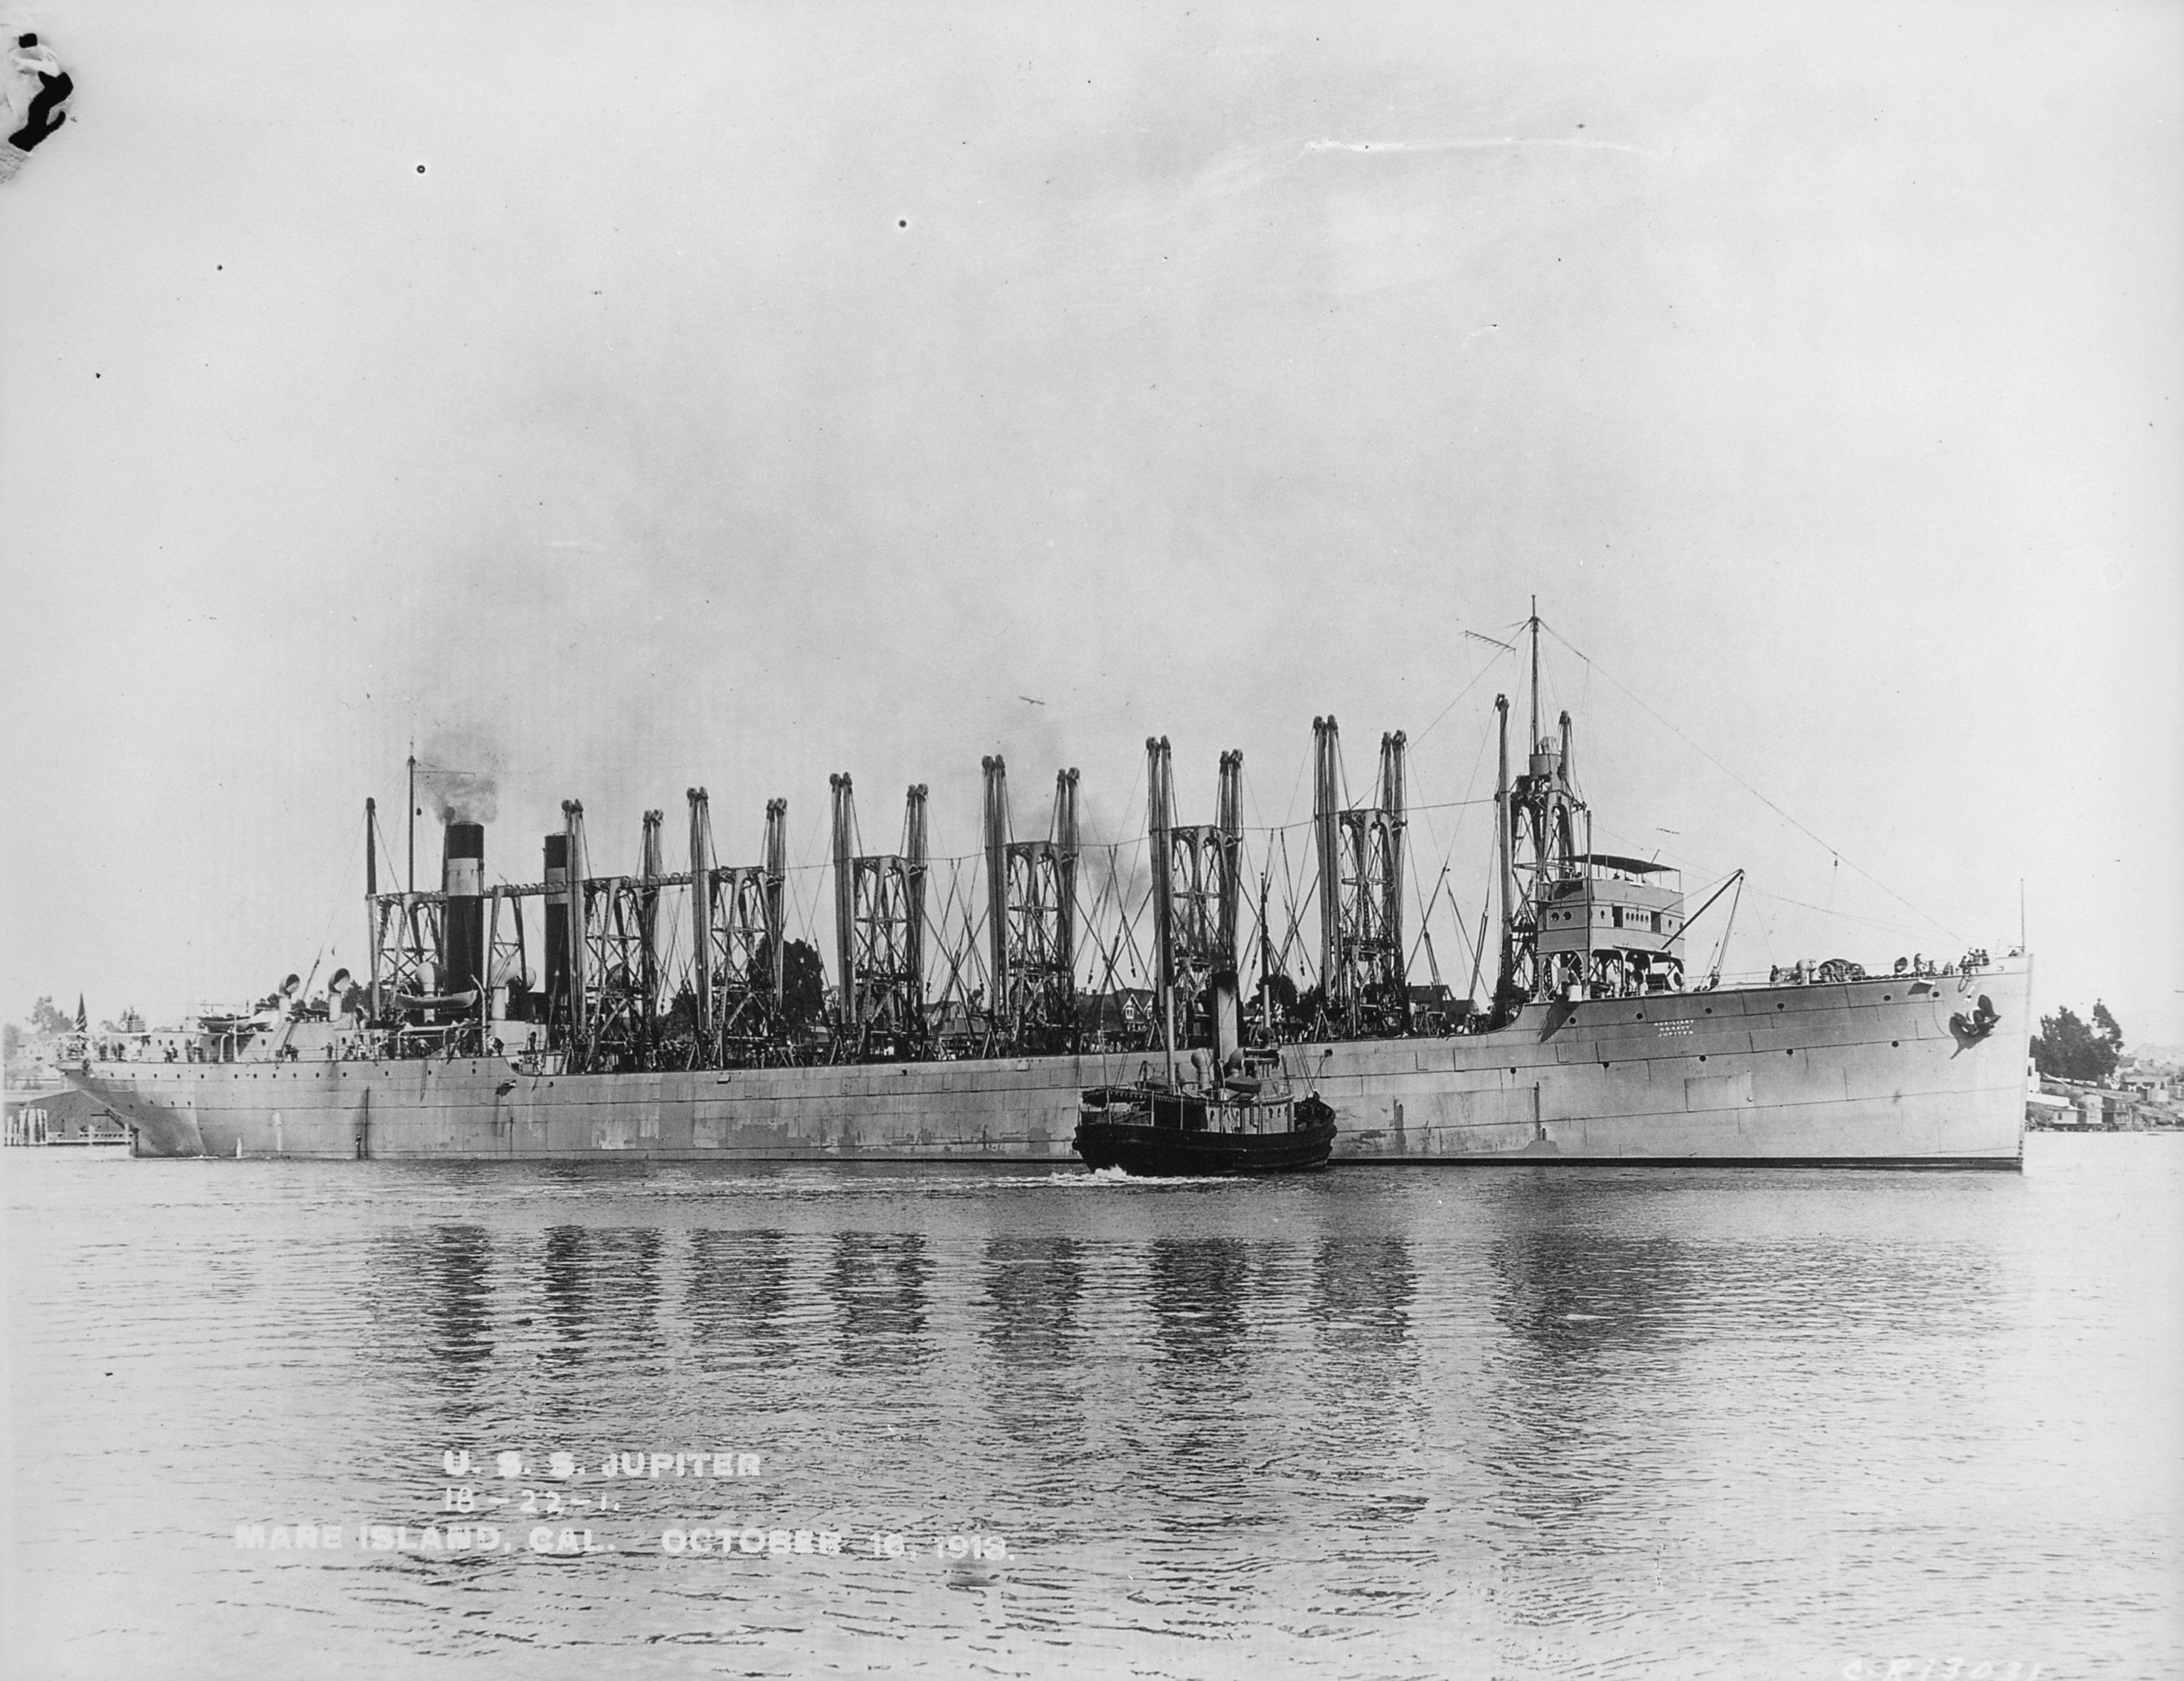 US Navy collier USS Jupiter at Mare Island, California, United States, 16 Oct 1913. In 1922 Jupiter was modified to become the United States’ first aircraft carrier and was renamed USS Langley